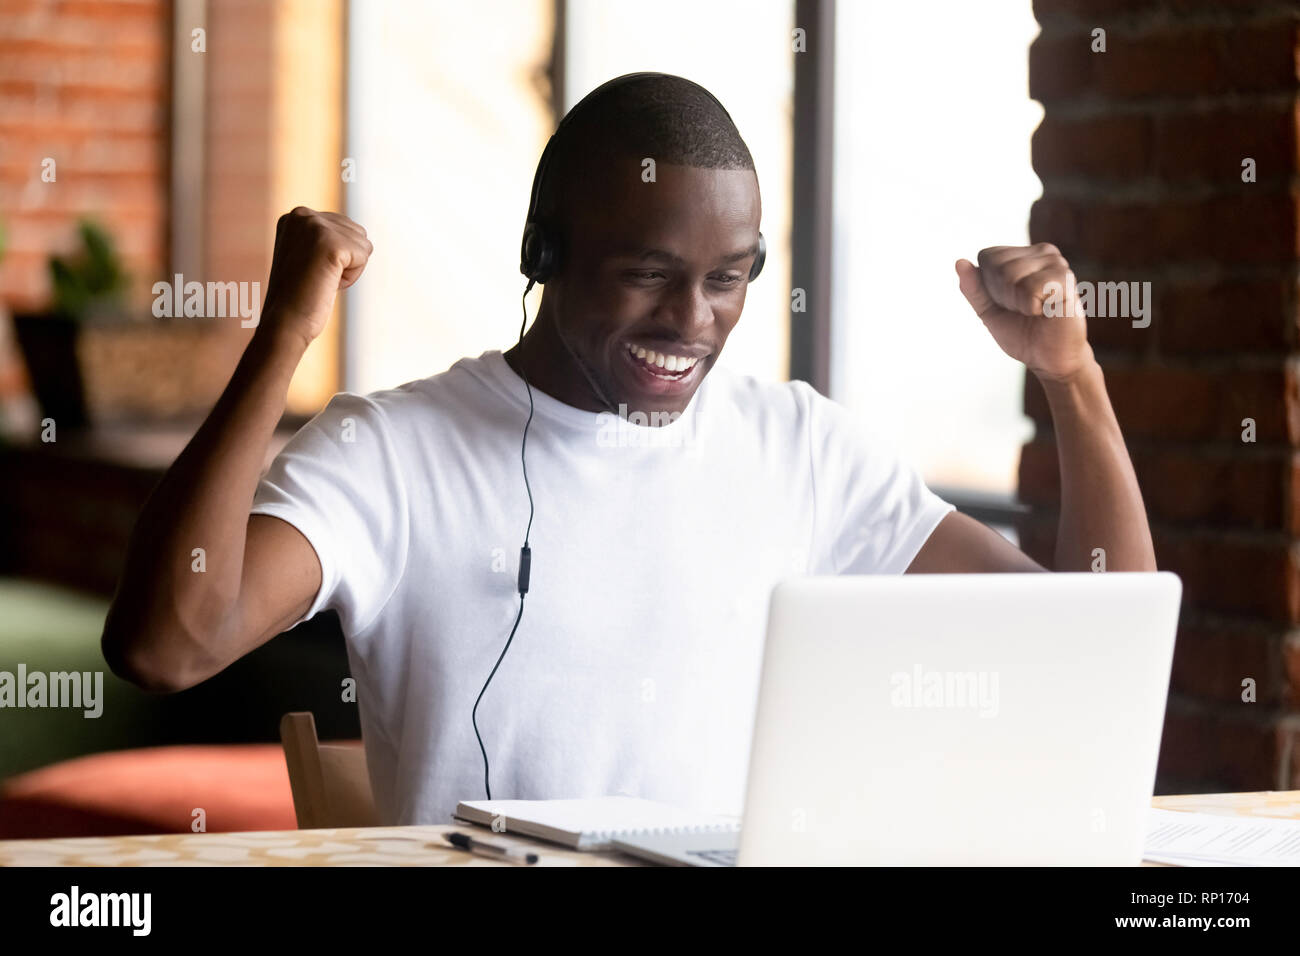 Black young man looking at computer screen feels happy Stock Photo